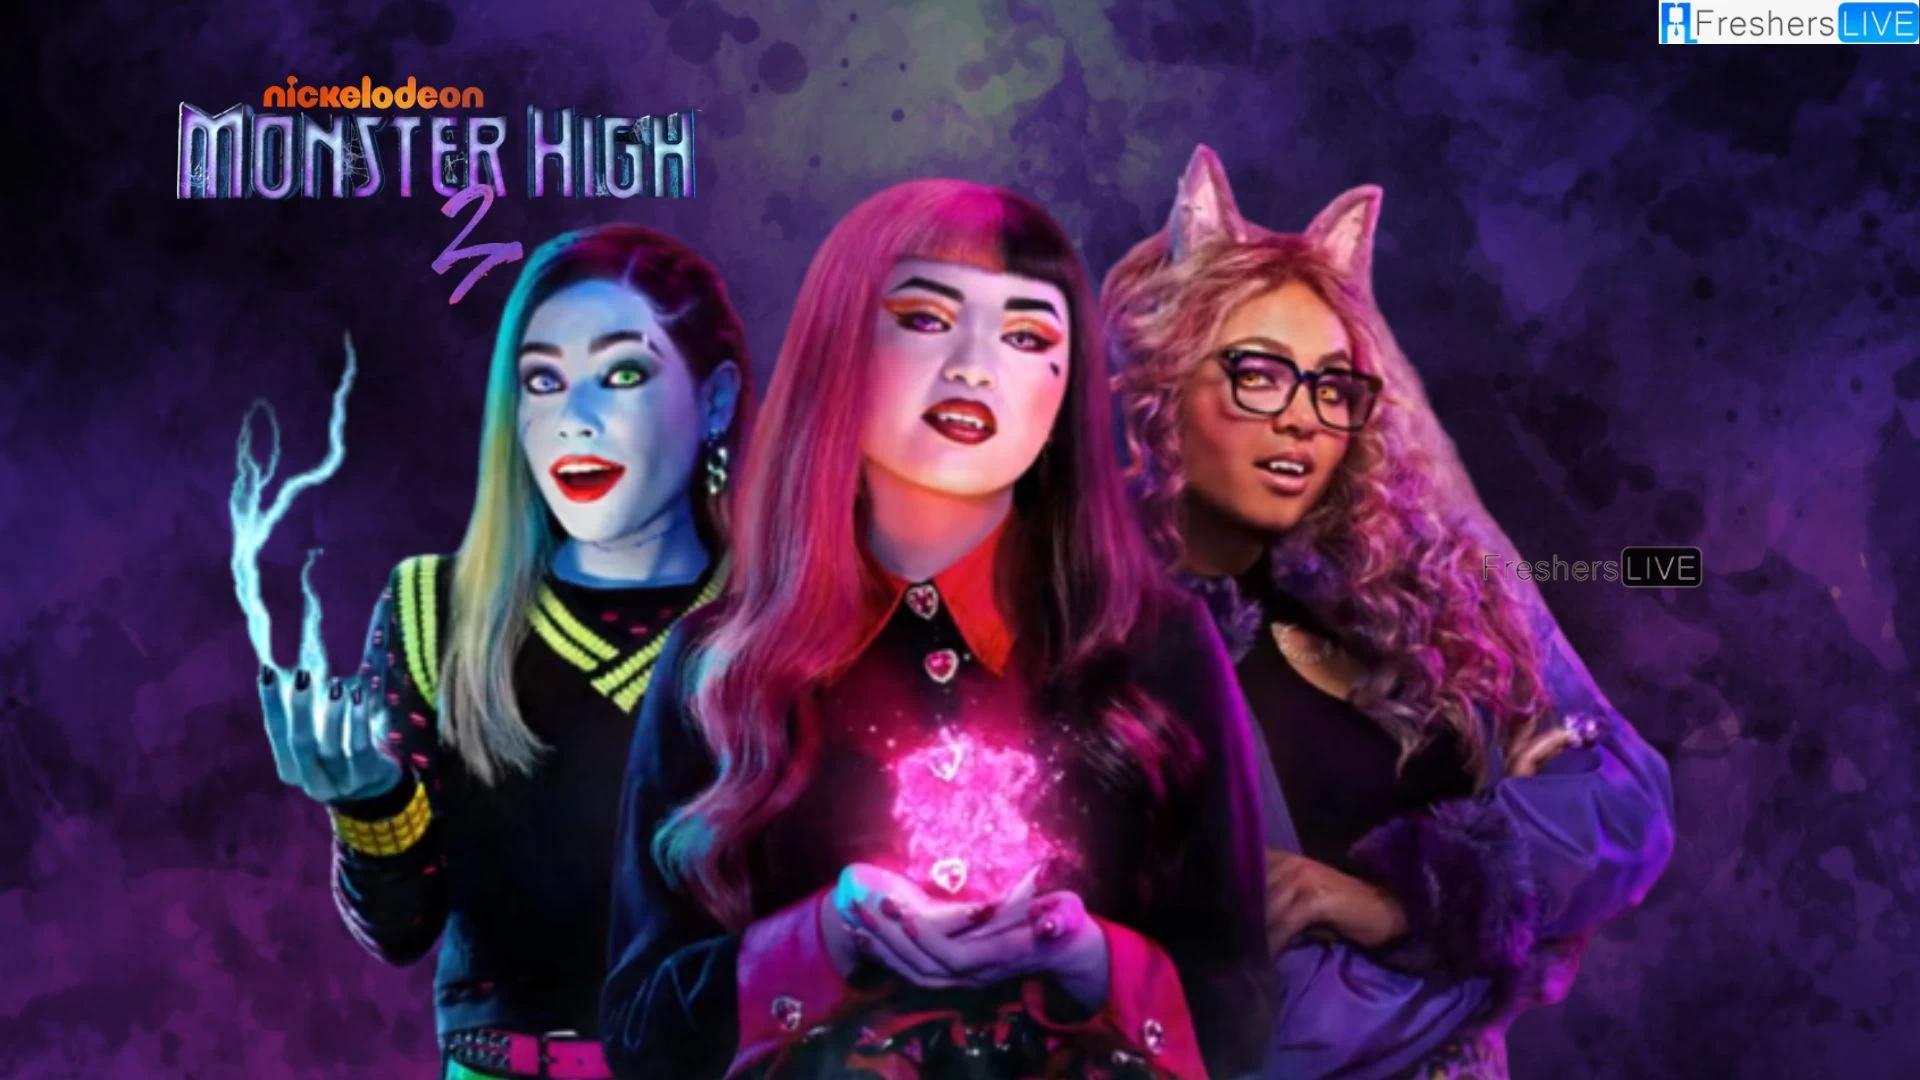 Will There Be a Monster High 3 Movie? Find Out Here